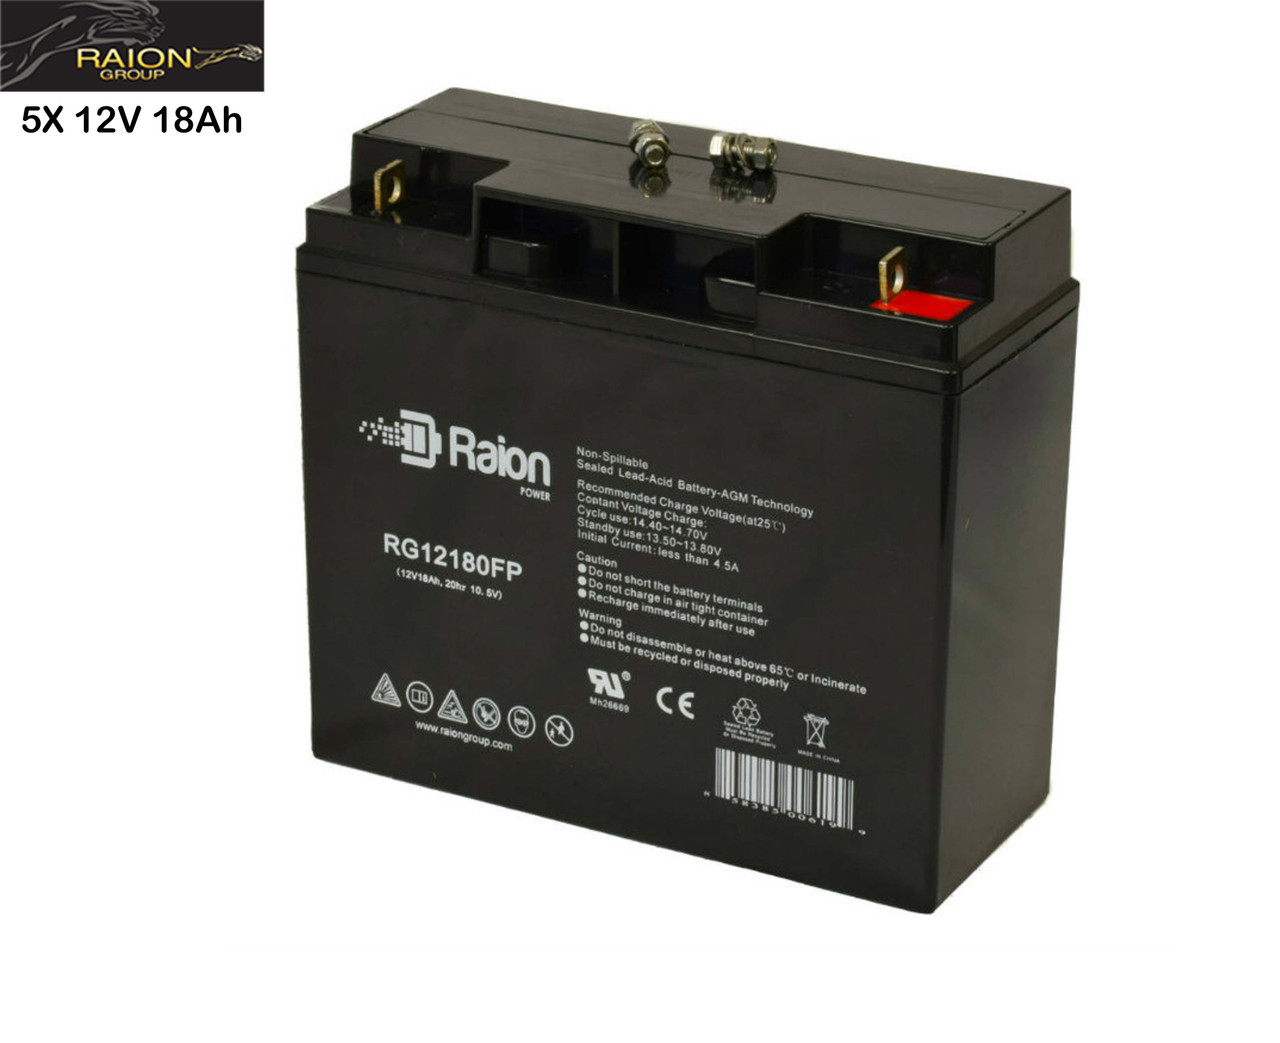 Raion Power Replacement 12V 18Ah Battery for Fun E-Cycle E-Scooter X-Men - 5 Pack